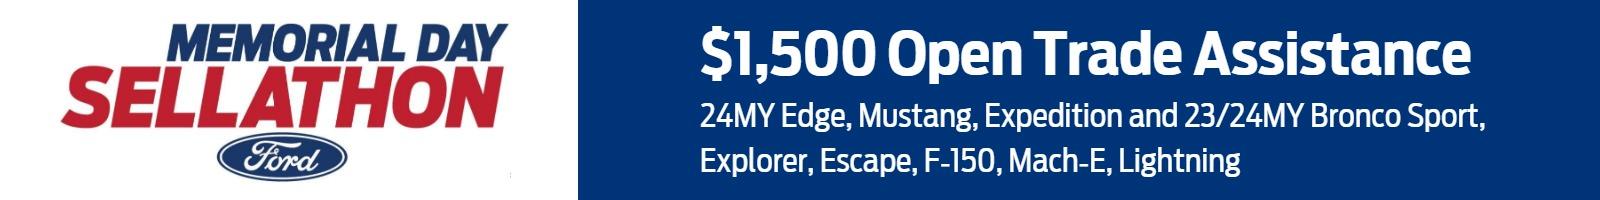 $1,500 Open Trade Assistance: ꟷ24MY Edge, Mustang, Expedition and 23/24MY Bronco Sport, Explorer, Escape, F-150, Mach-E, Lightning | Banner